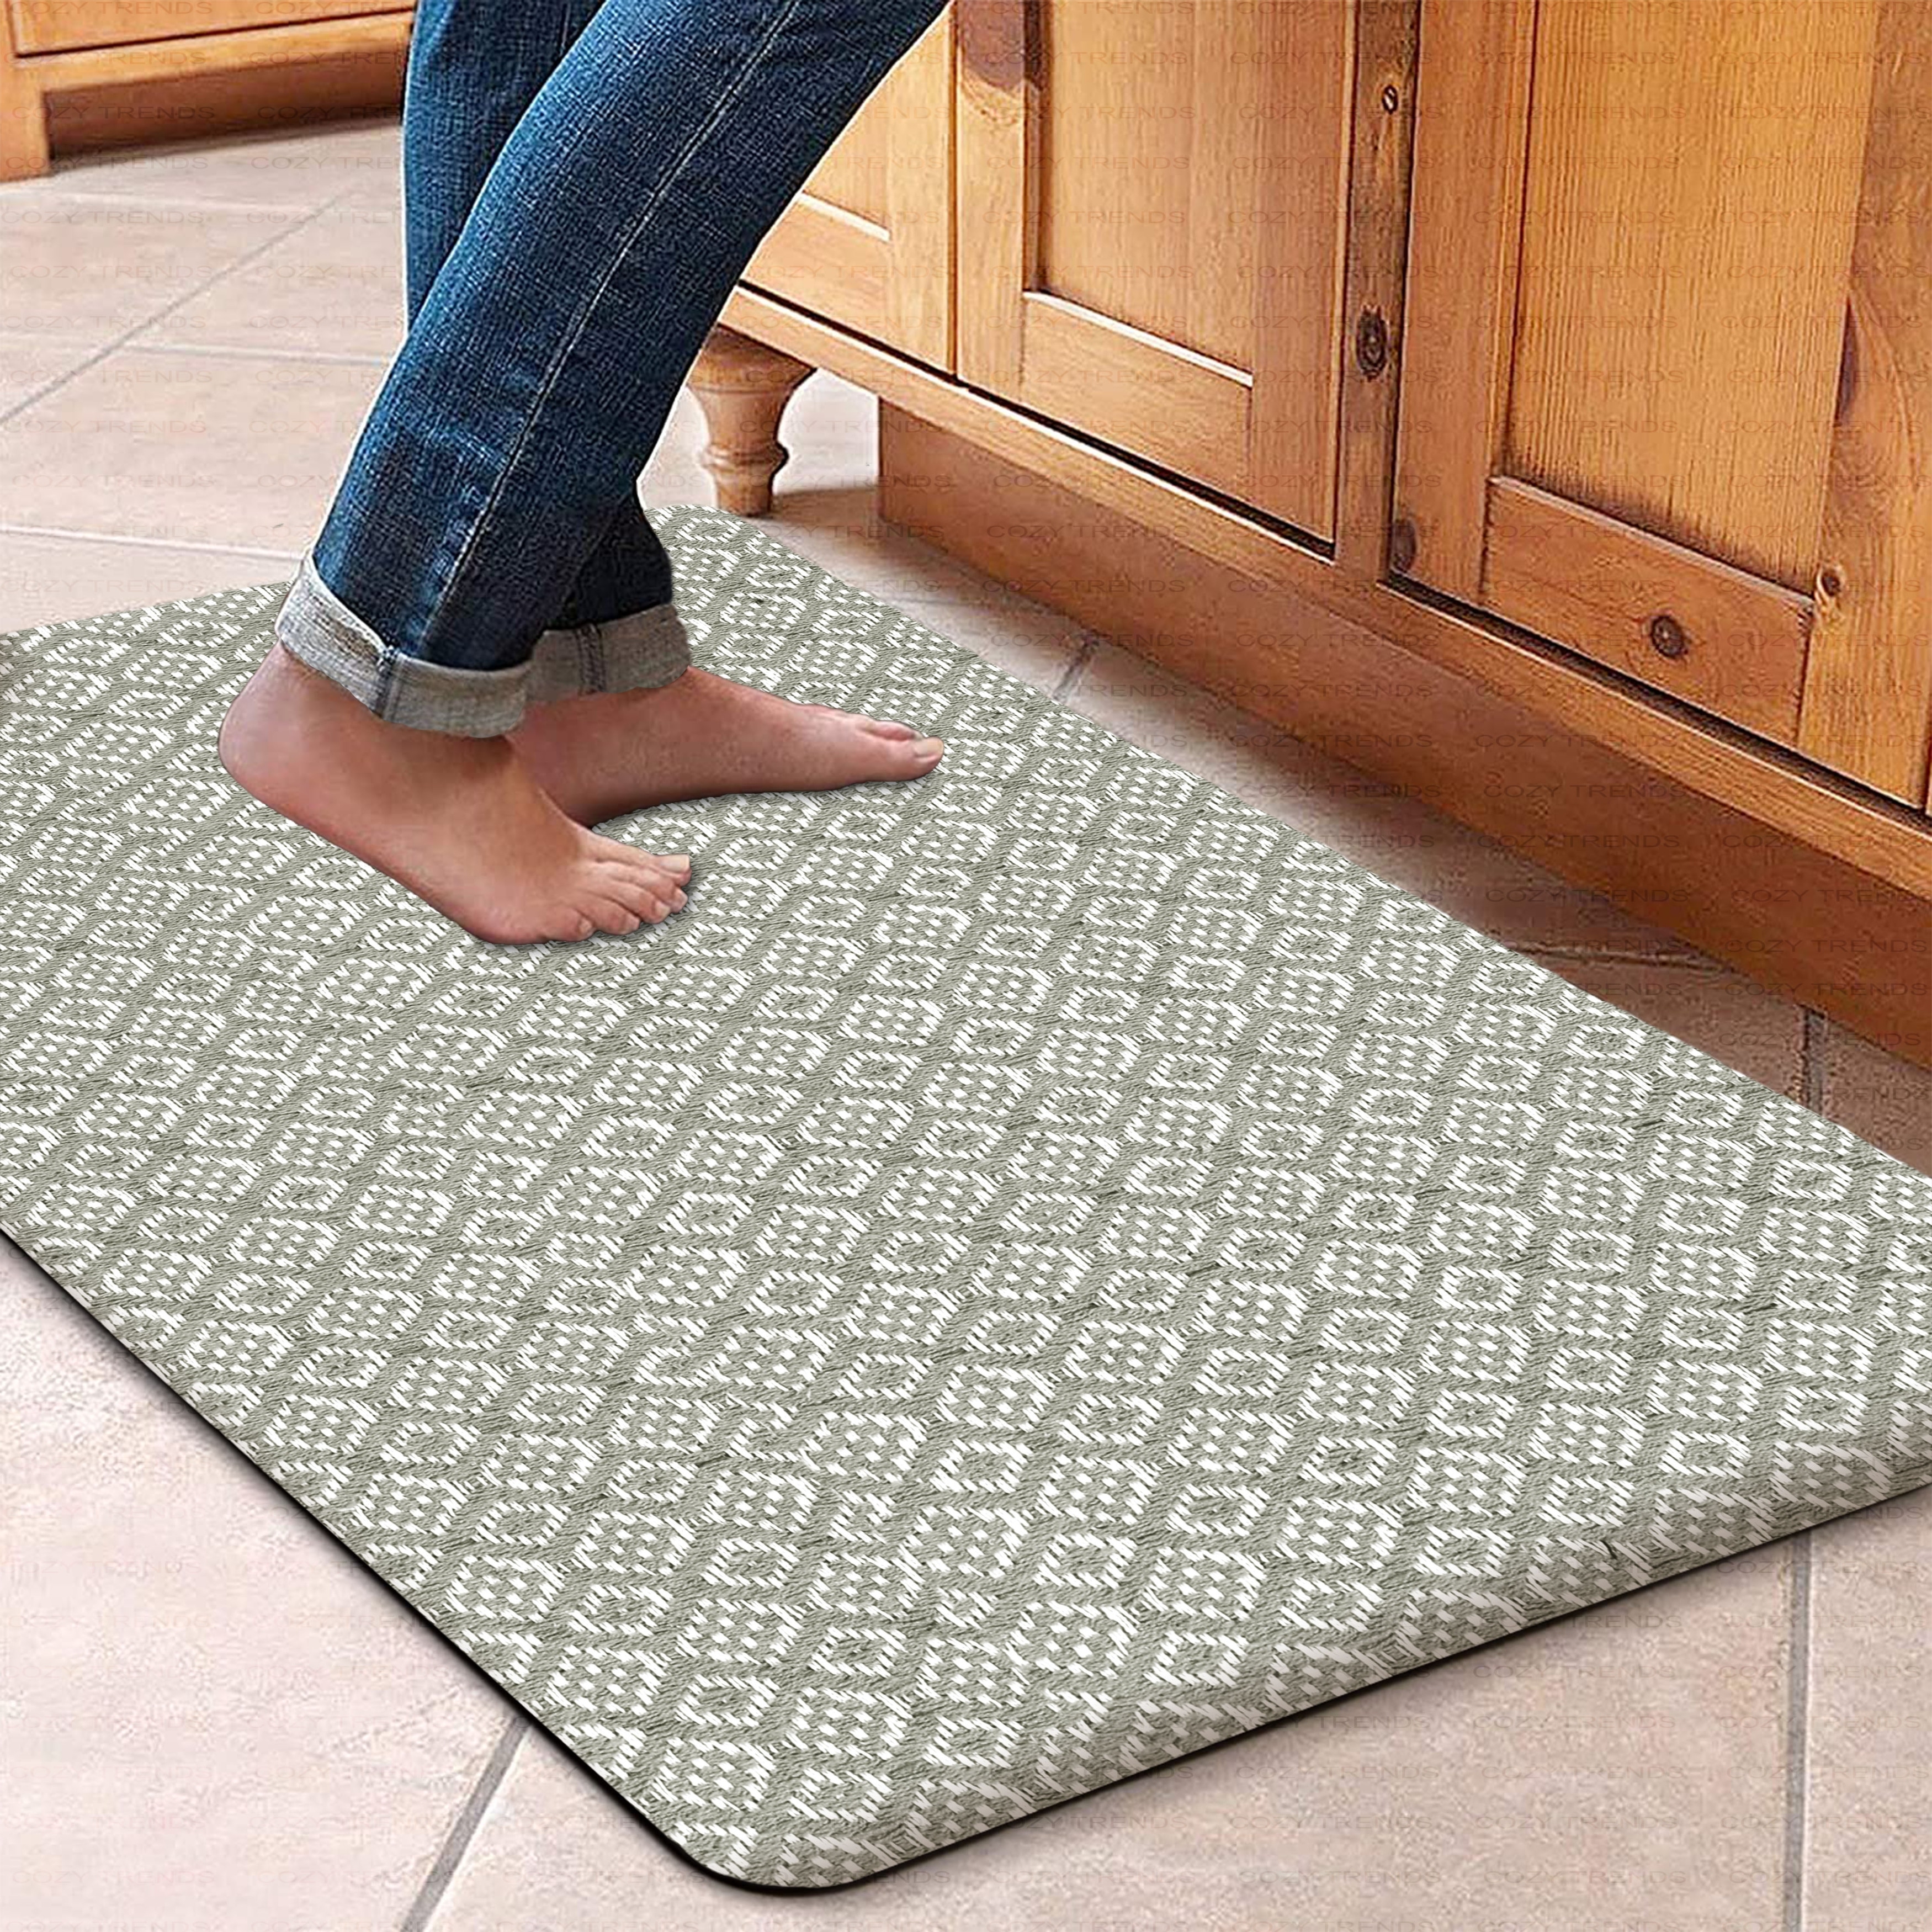 https://ak1.ostkcdn.com/images/products/is/images/direct/2c94be3036e03723f583e23b6cb4b9a1c7287b62/Hand-Woven-Kitchen--Doormat-Bathroom-100%25-Cotton-Mat-18%22-x-30%22-With-Foam-Backing.jpg